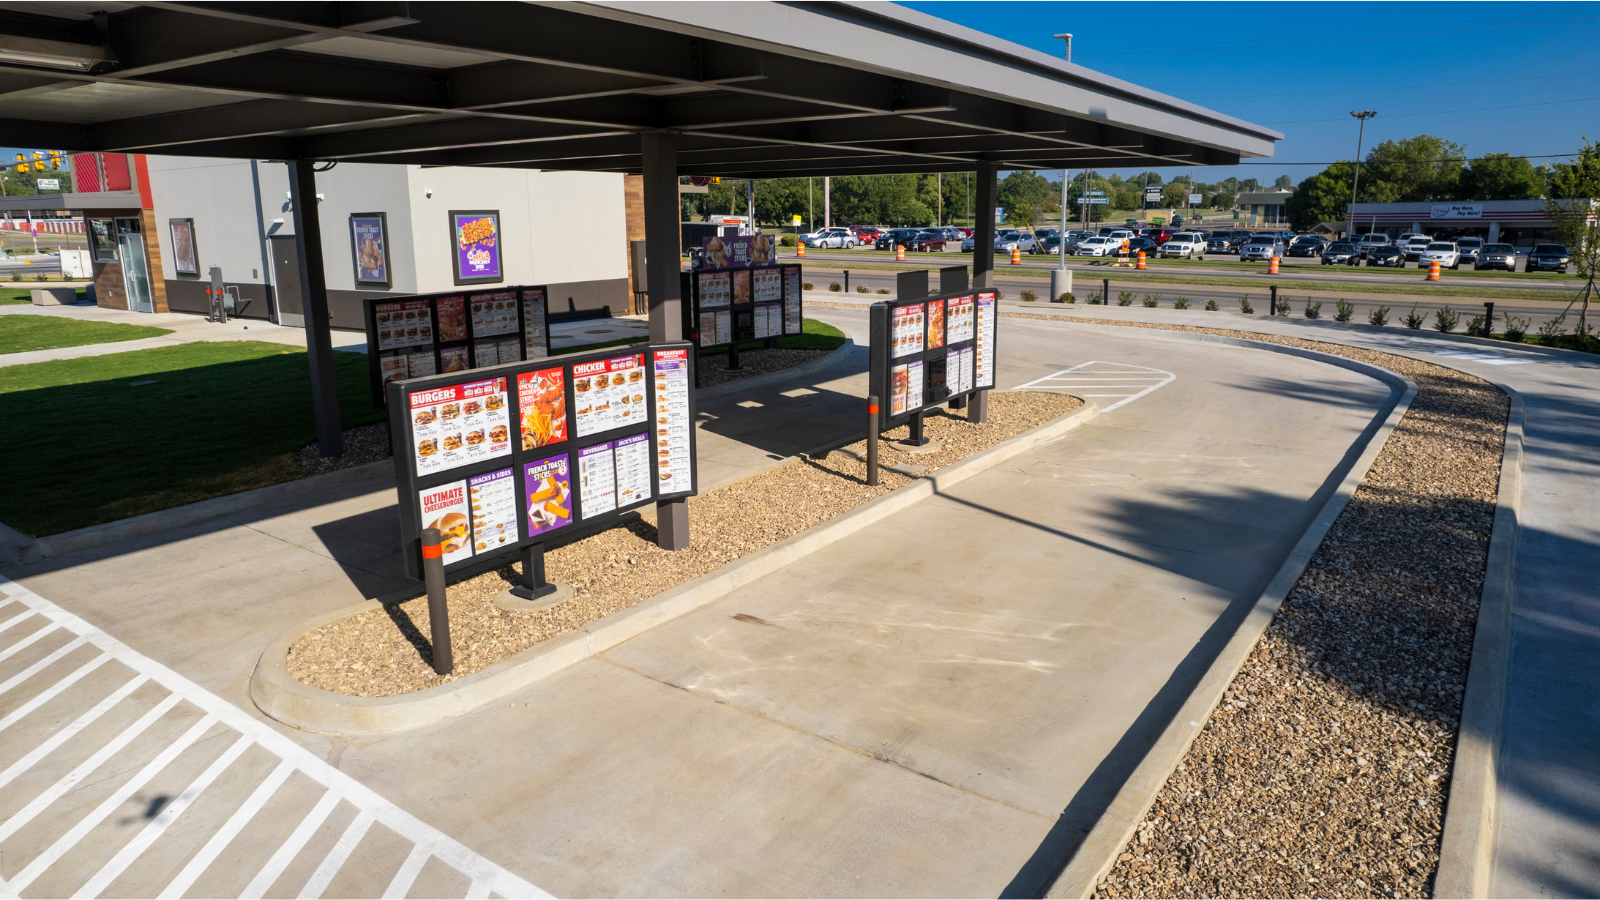 12 Best Drive-Thru Franchises to Own in 2023